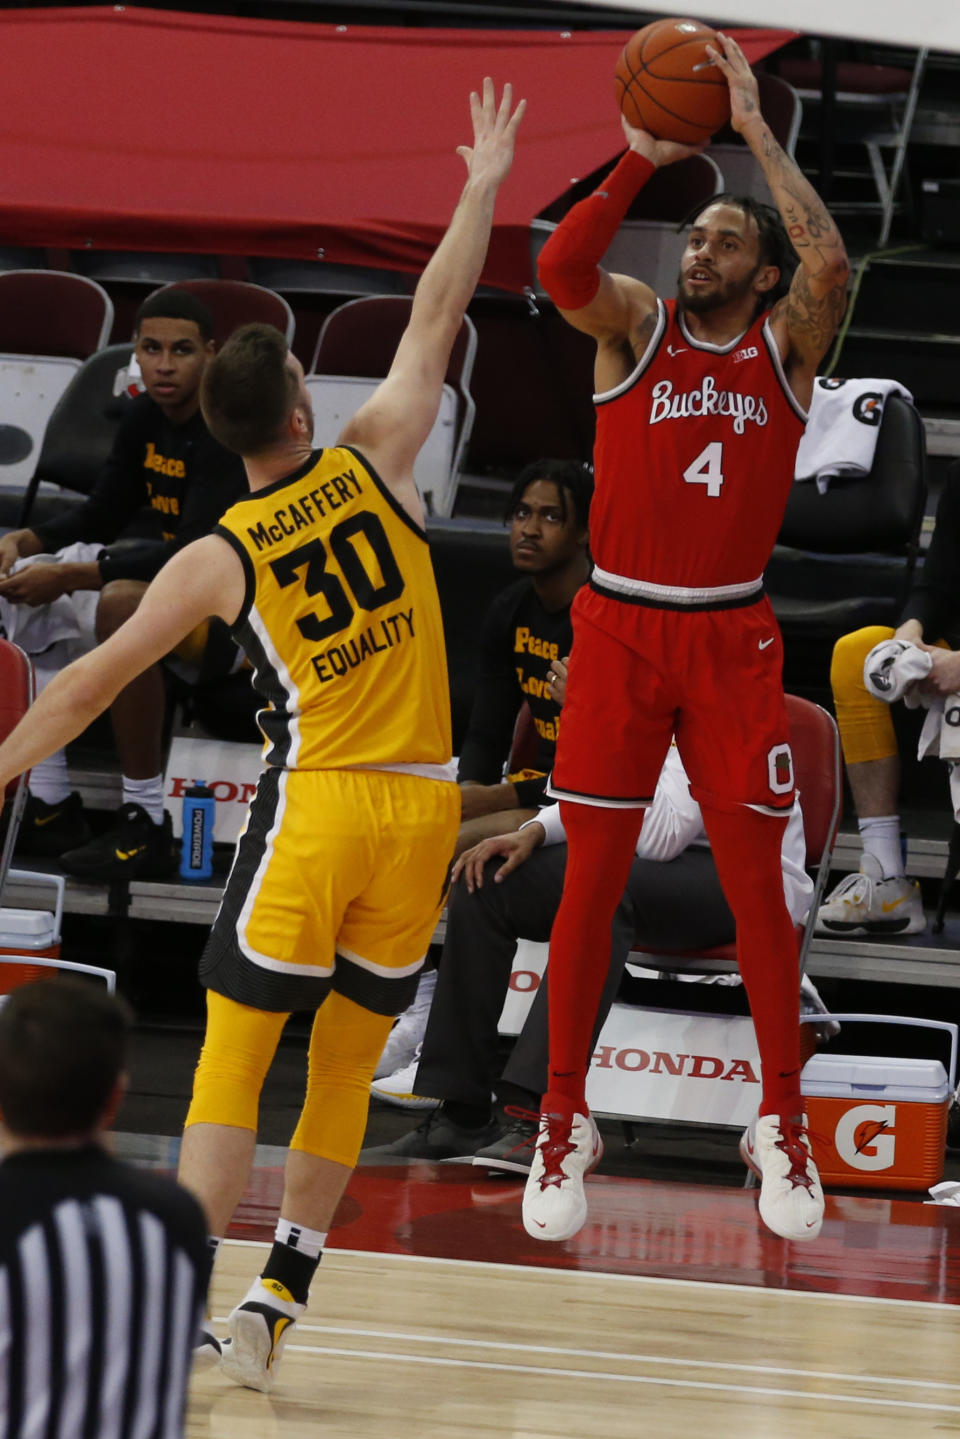 Ohio State's Duane Washington, right, shoots over Iowa's Connor McCaffery during the first half of an NCAA college basketball game Sunday, Feb. 28, 2021, in Columbus, Ohio. (AP Photo/Jay LaPrete)